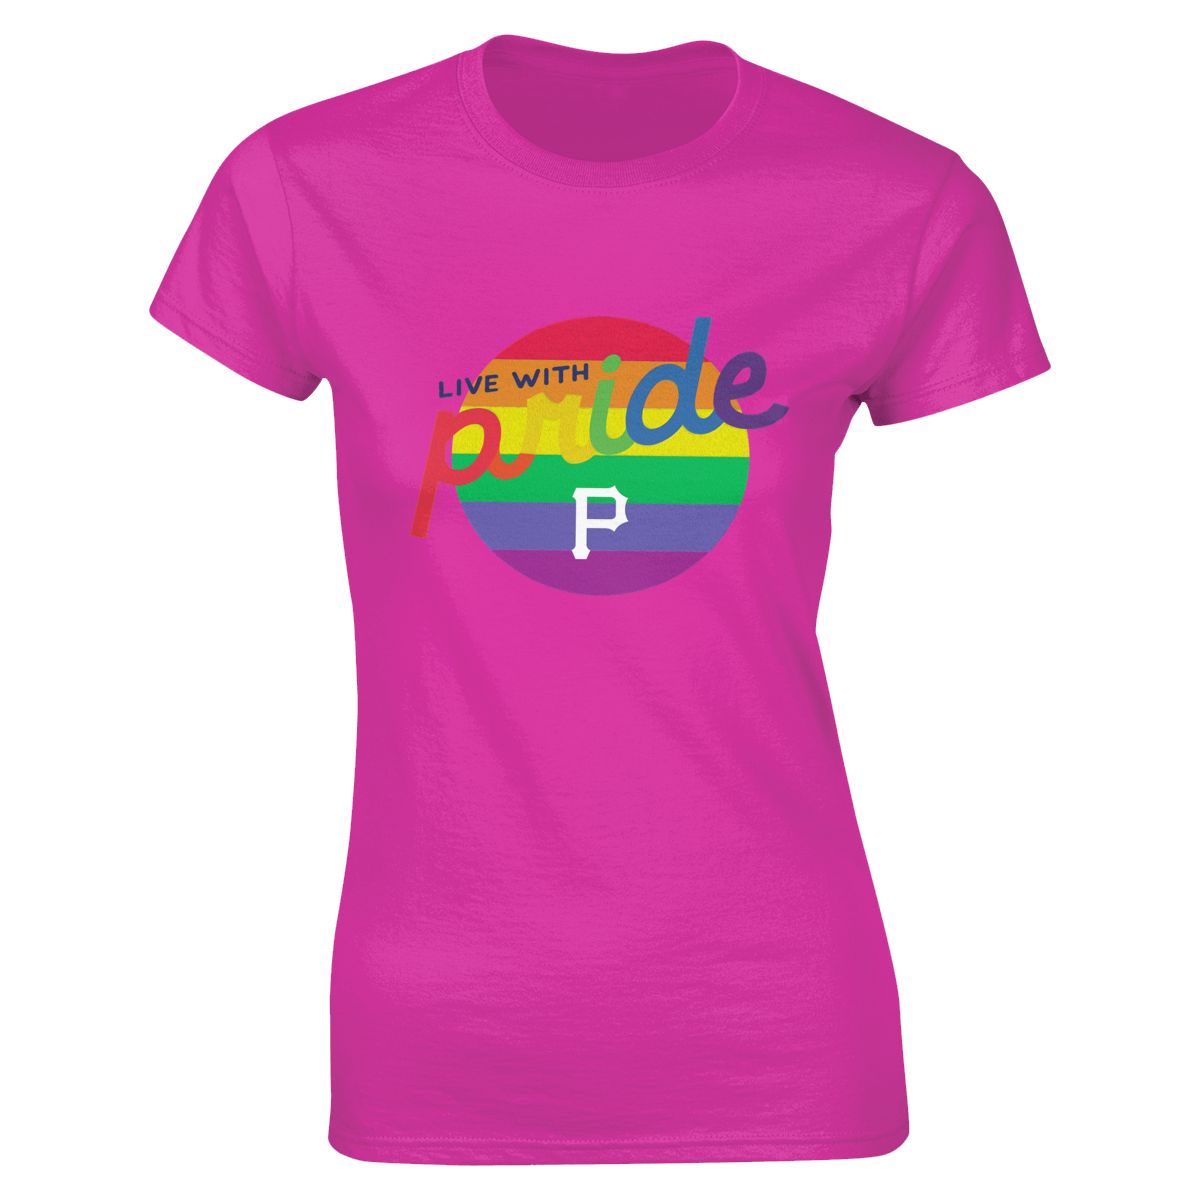 Pittsburgh Pirates Round LGBT Lettering Women's Soft Cotton T-Shirt